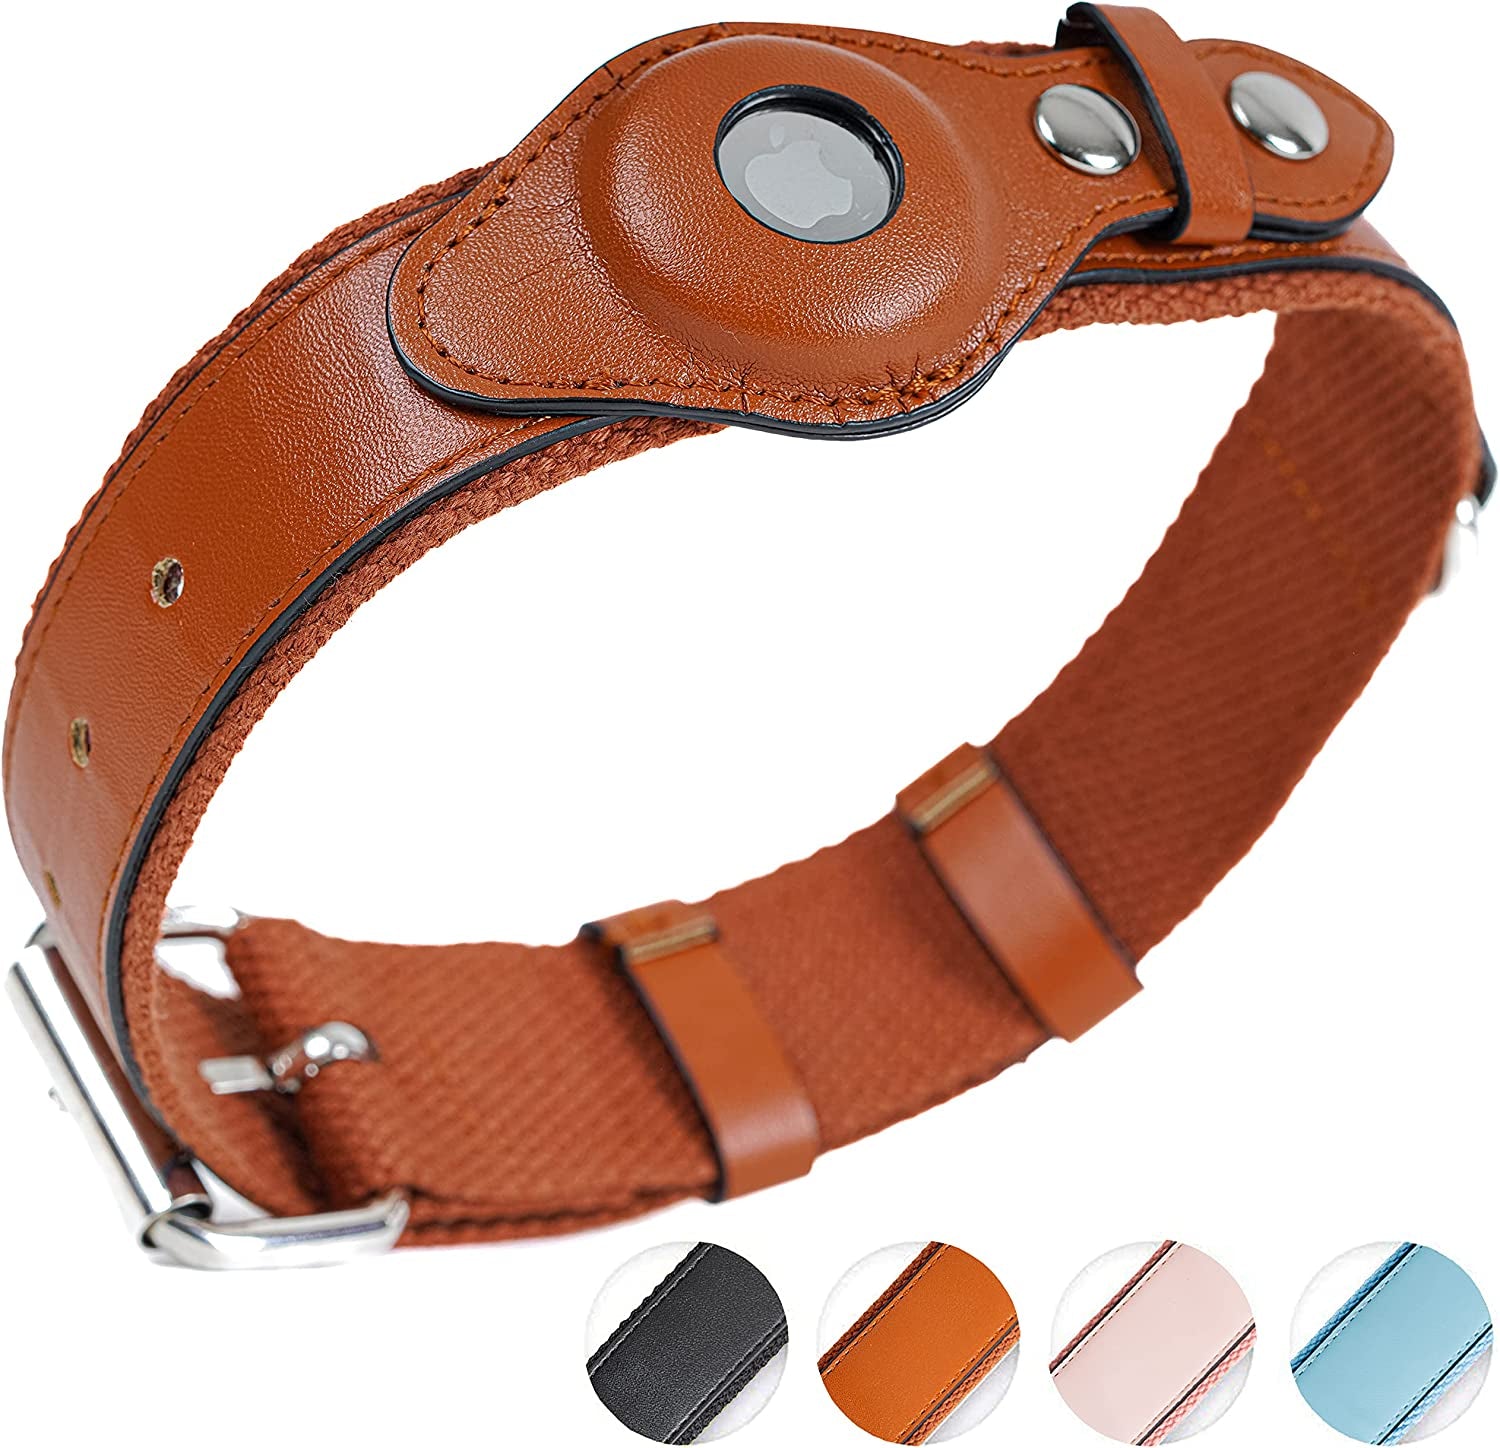 Safe Paws Airtag Dog Collar Holder - Our Adjustable Air Tag Dog Collar Holder Fits Small Medium and Large Dogs - Use Our Elegant PU Leather Dog Airtag Collar to Quickly Locate Your Dog Electronics > GPS Accessories > GPS Cases Safe Paws Brown Small 